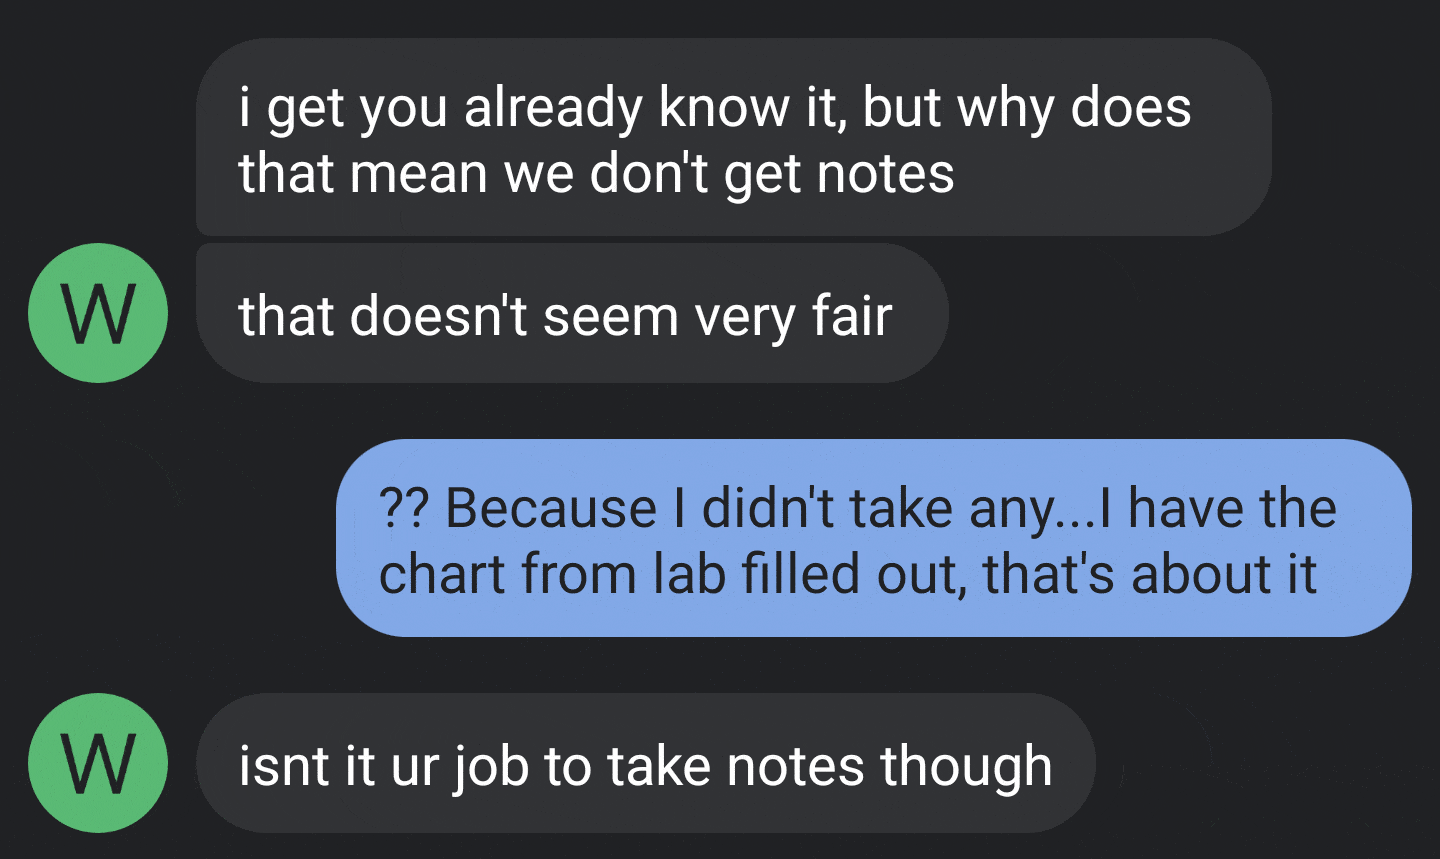 lyrics - i get you already know it, but why does that mean we don't get notes W that doesn't seem very fair ?? Because I didn't take any... I have the chart from lab filled out, that's about it W isnt it ur job to take notes though